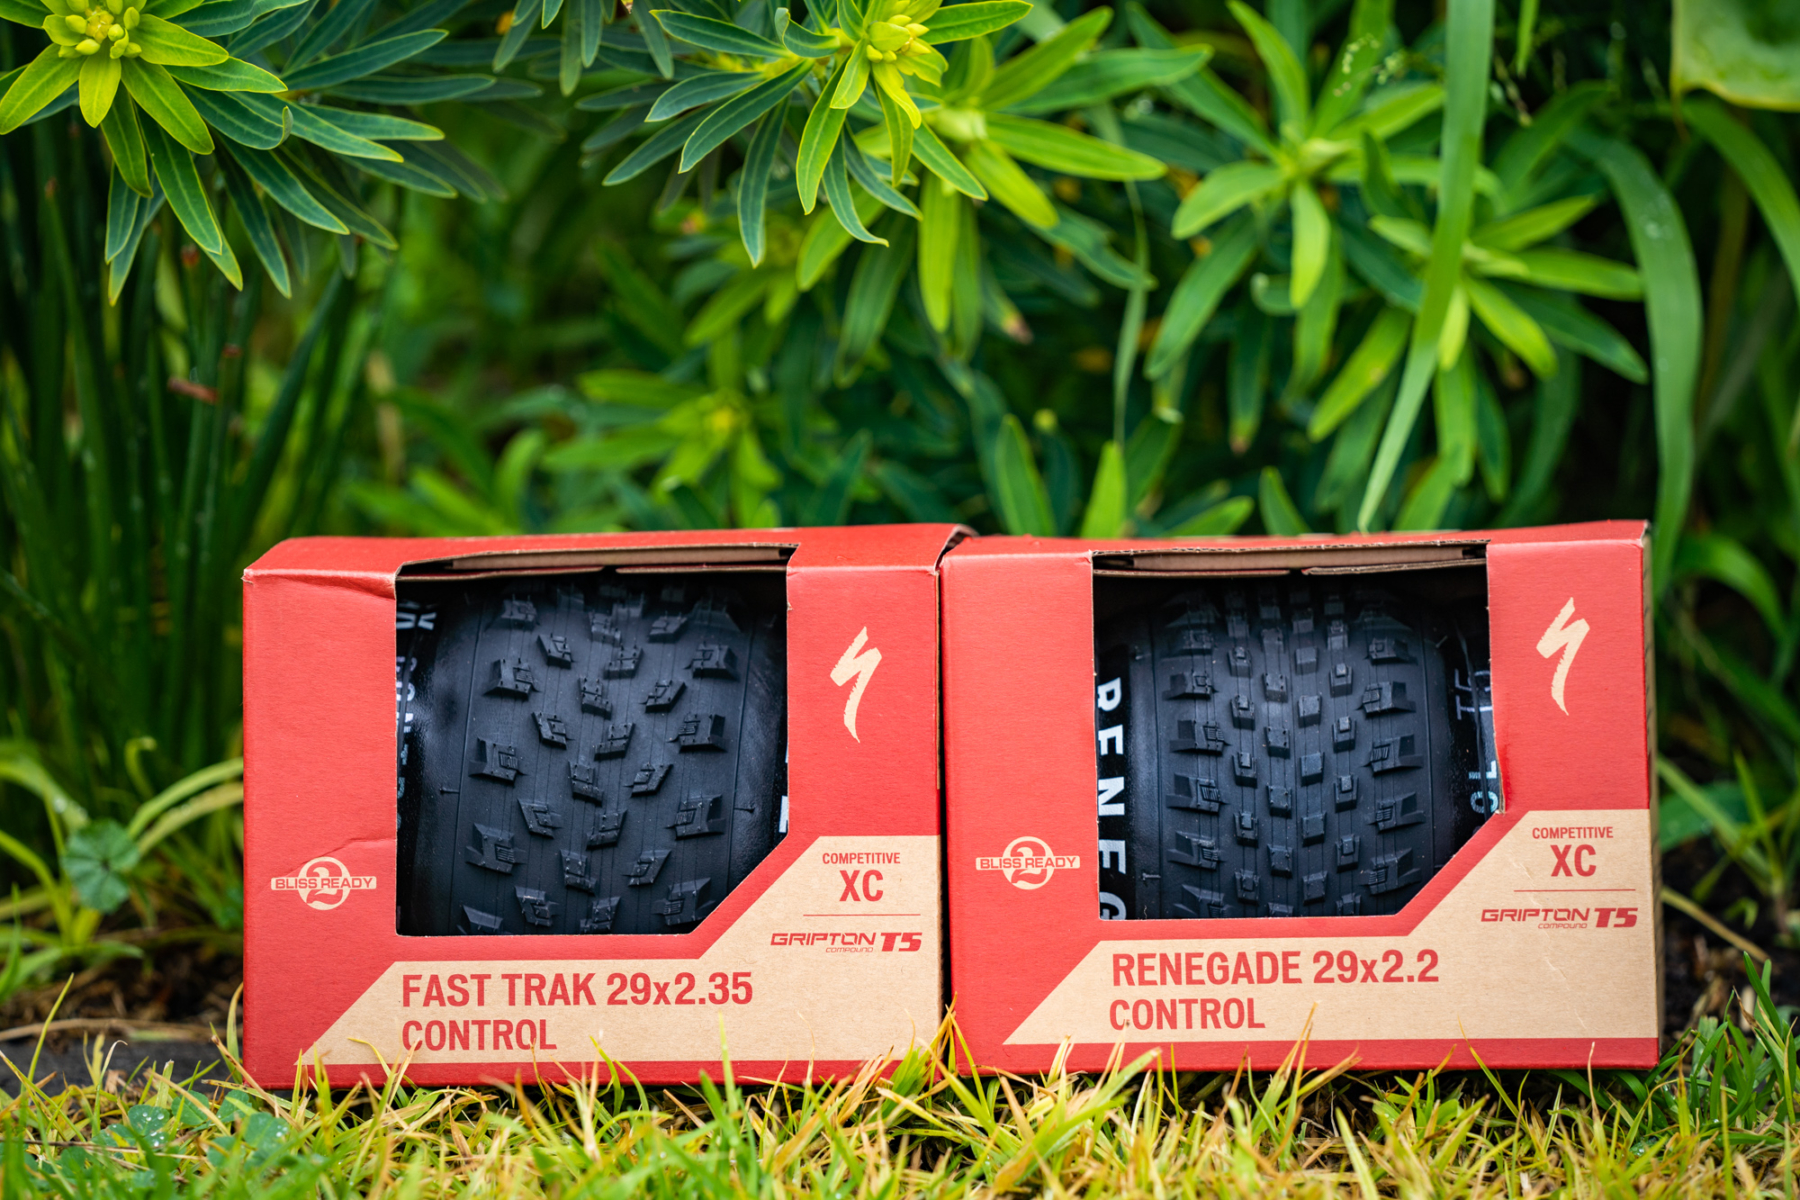 specialized fast trak renegade t5 control tyres